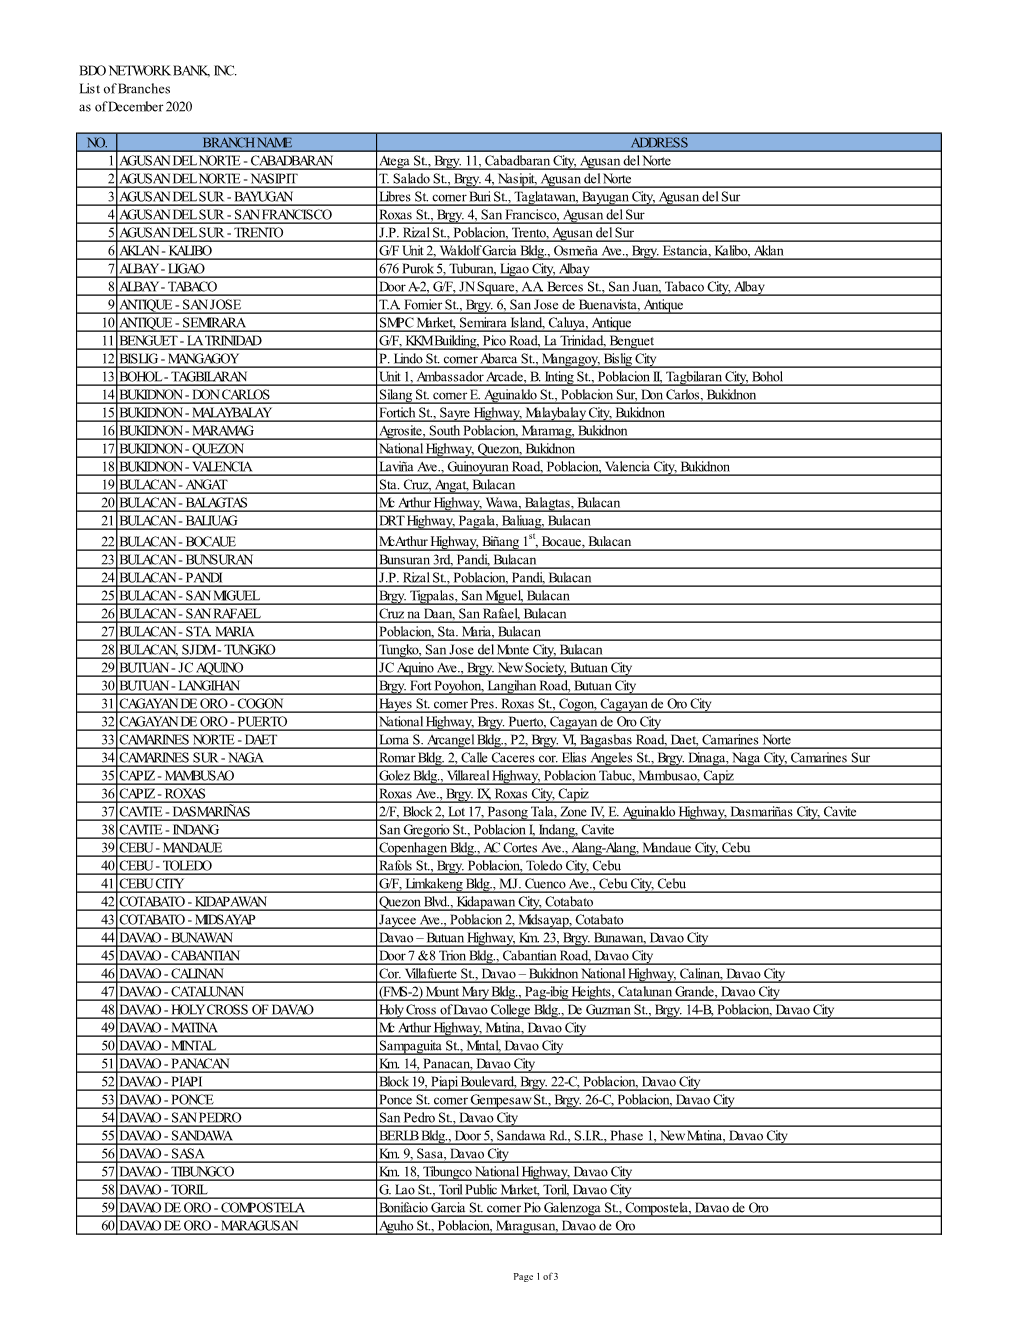 BDO NETWORK BANK, INC. List of Branches As of December 2020